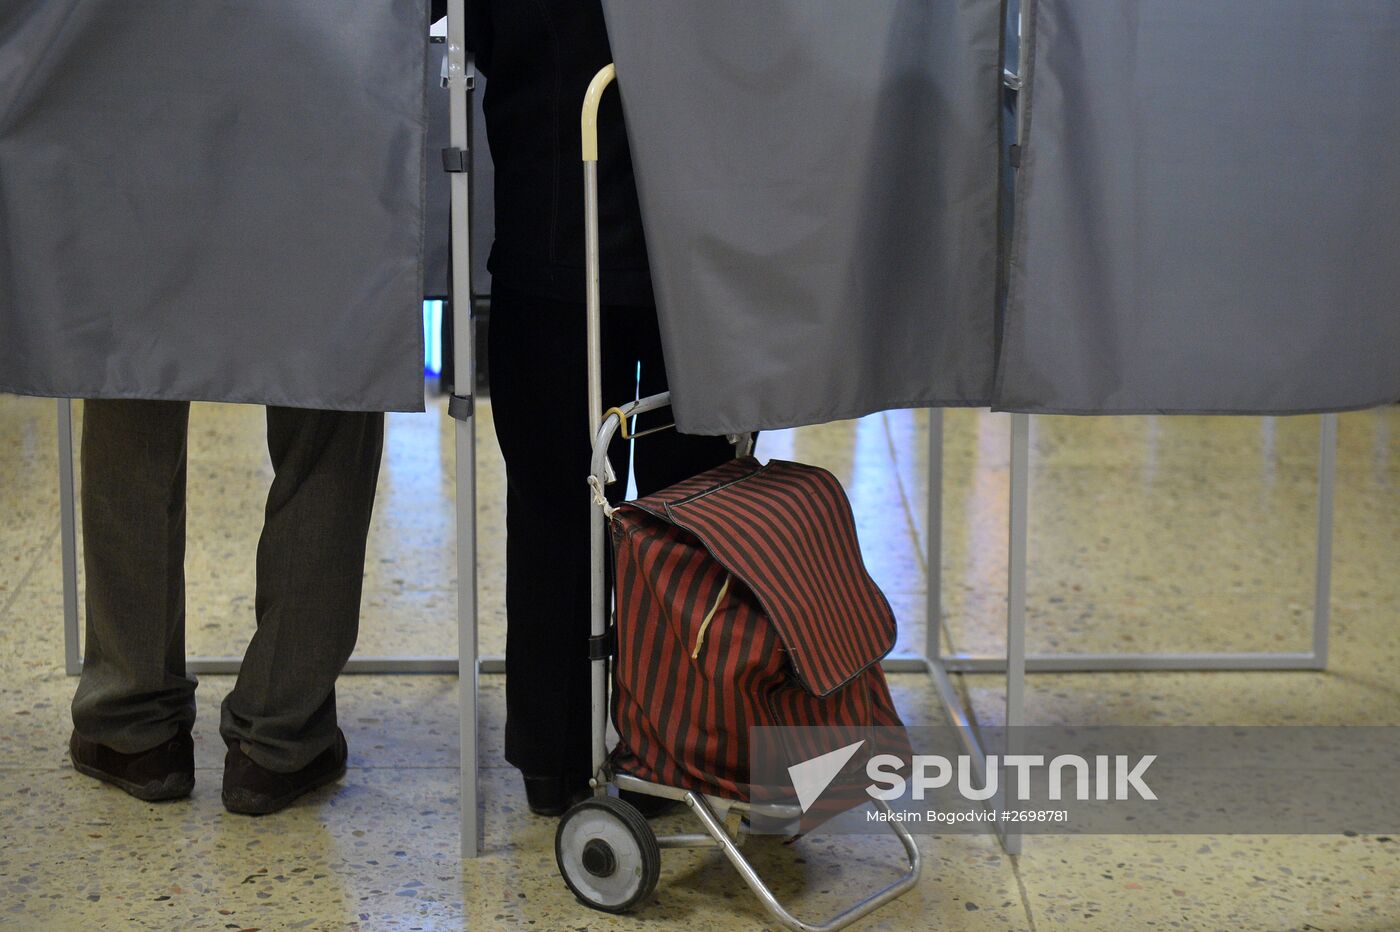 Russia holds Unified Voting Day